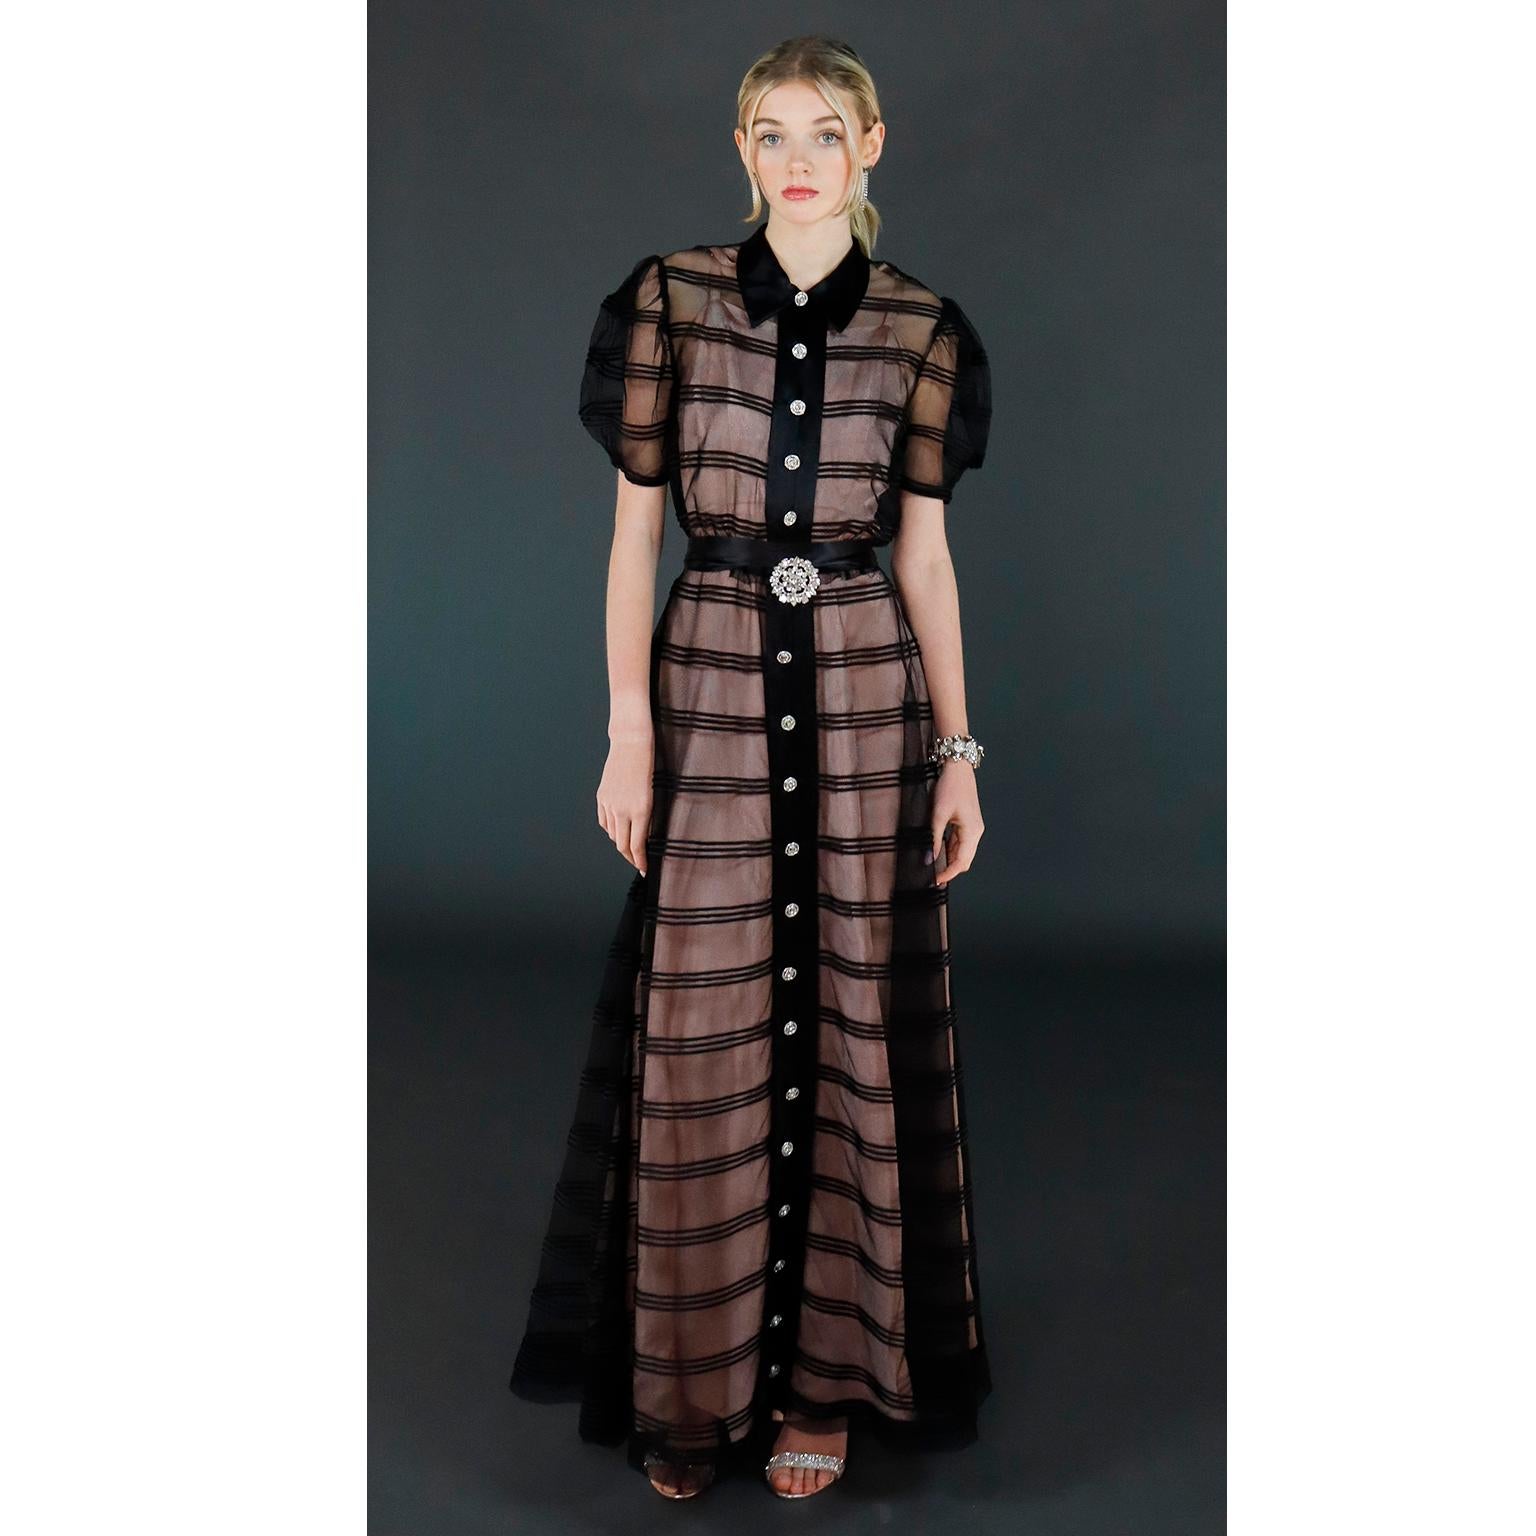 This gorgeous vintage dress was designed back in the late 1930's or early 1940's and is reminiscent of many couture fashion house dresses created in the 2000's and 2010's! The dress has short puff sleeves and horizontal lines over a sheer black net